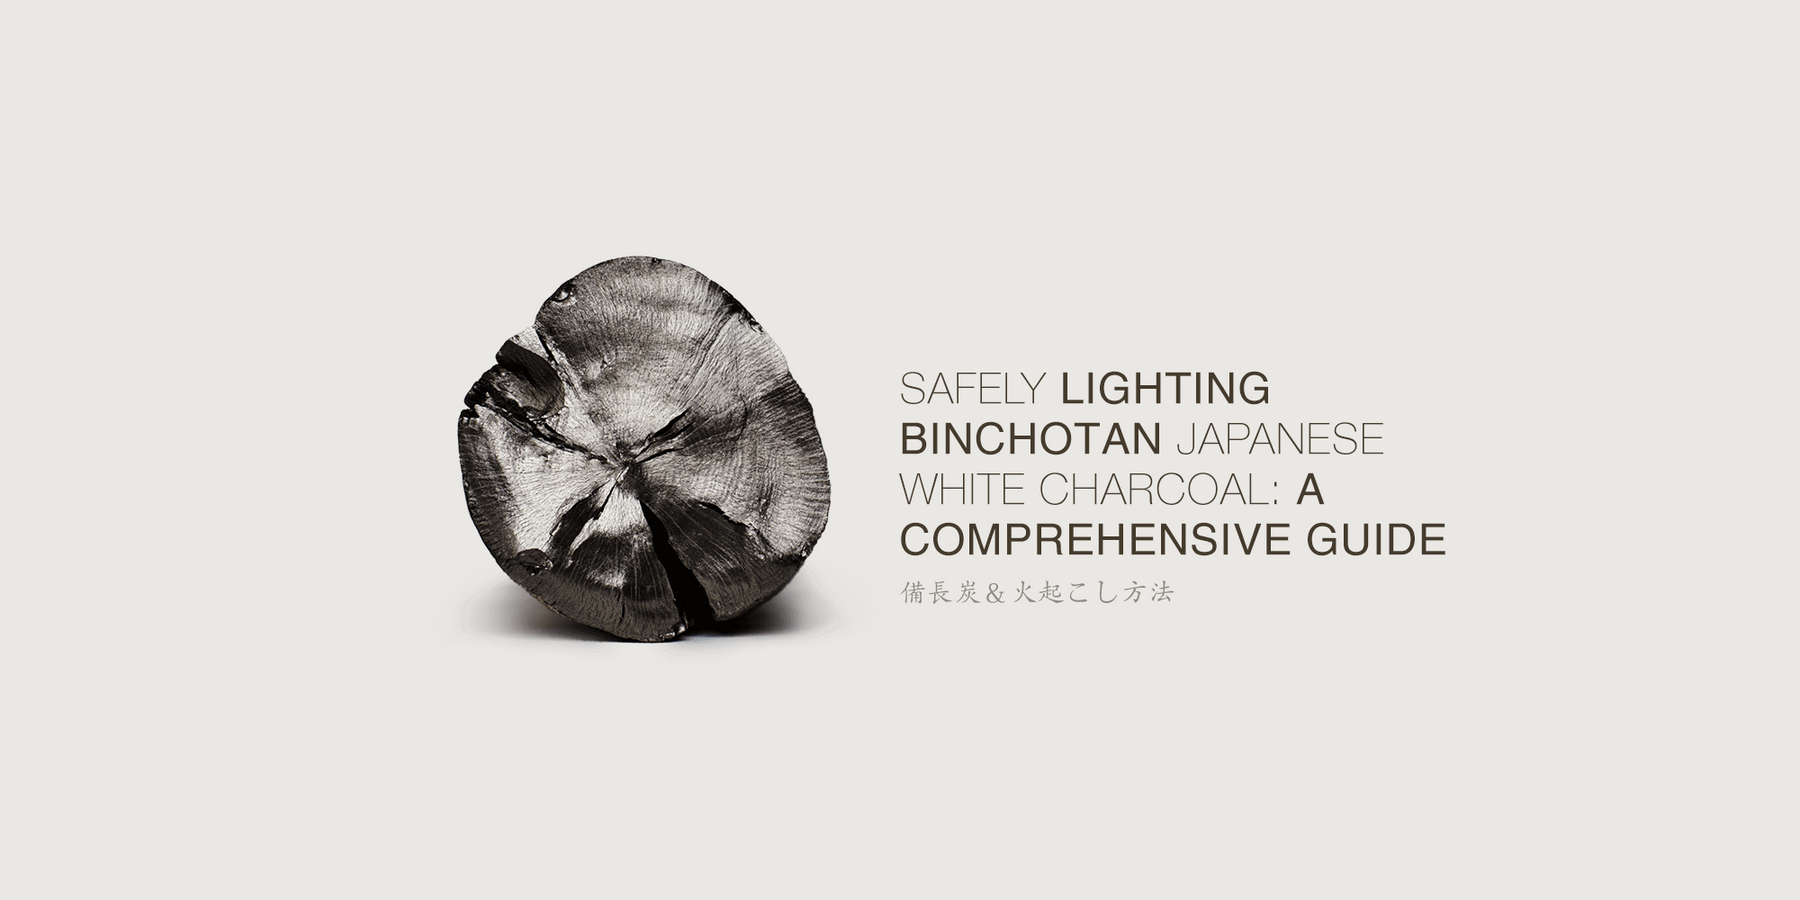 Safely Lighting Binchotan Japanese White Charcoal: A Comprehensive Guide